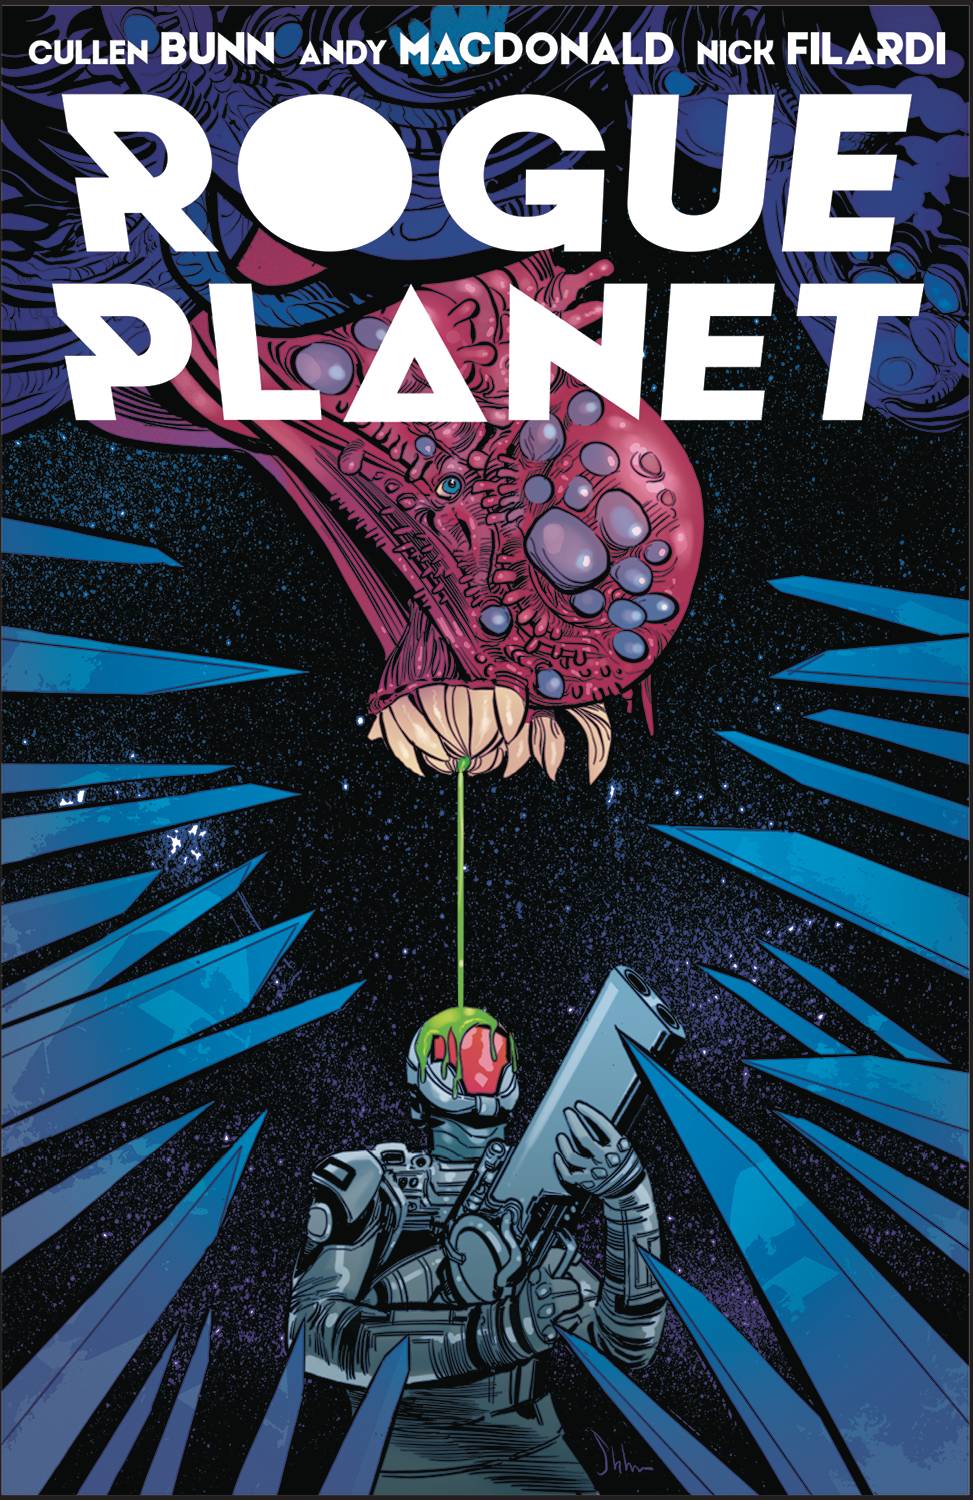 Rogue Planet #1 Cover B Strahm